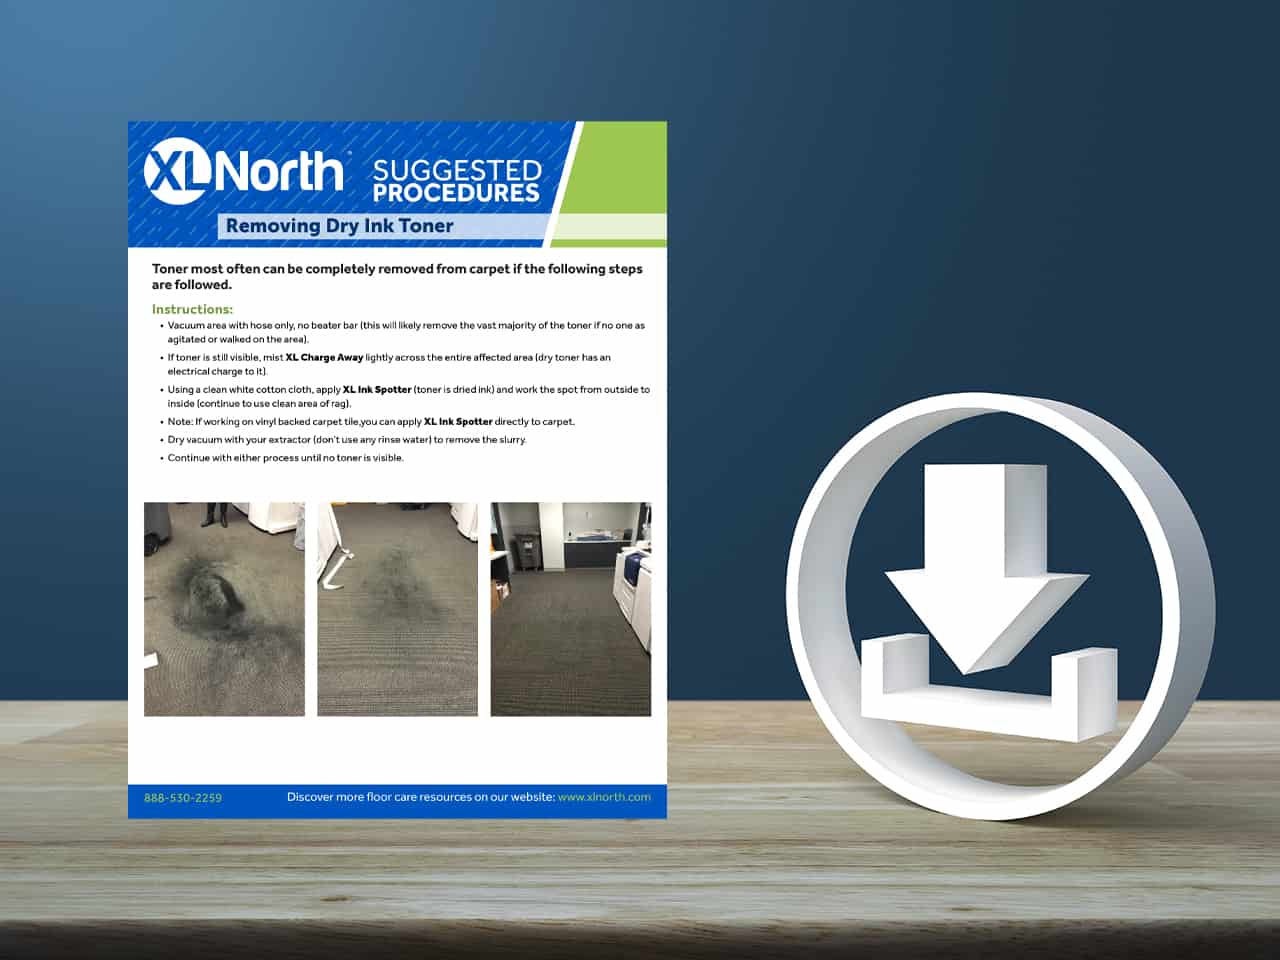 XL North Suggested Procedures: Remove Dry Ink Toner from Carpet